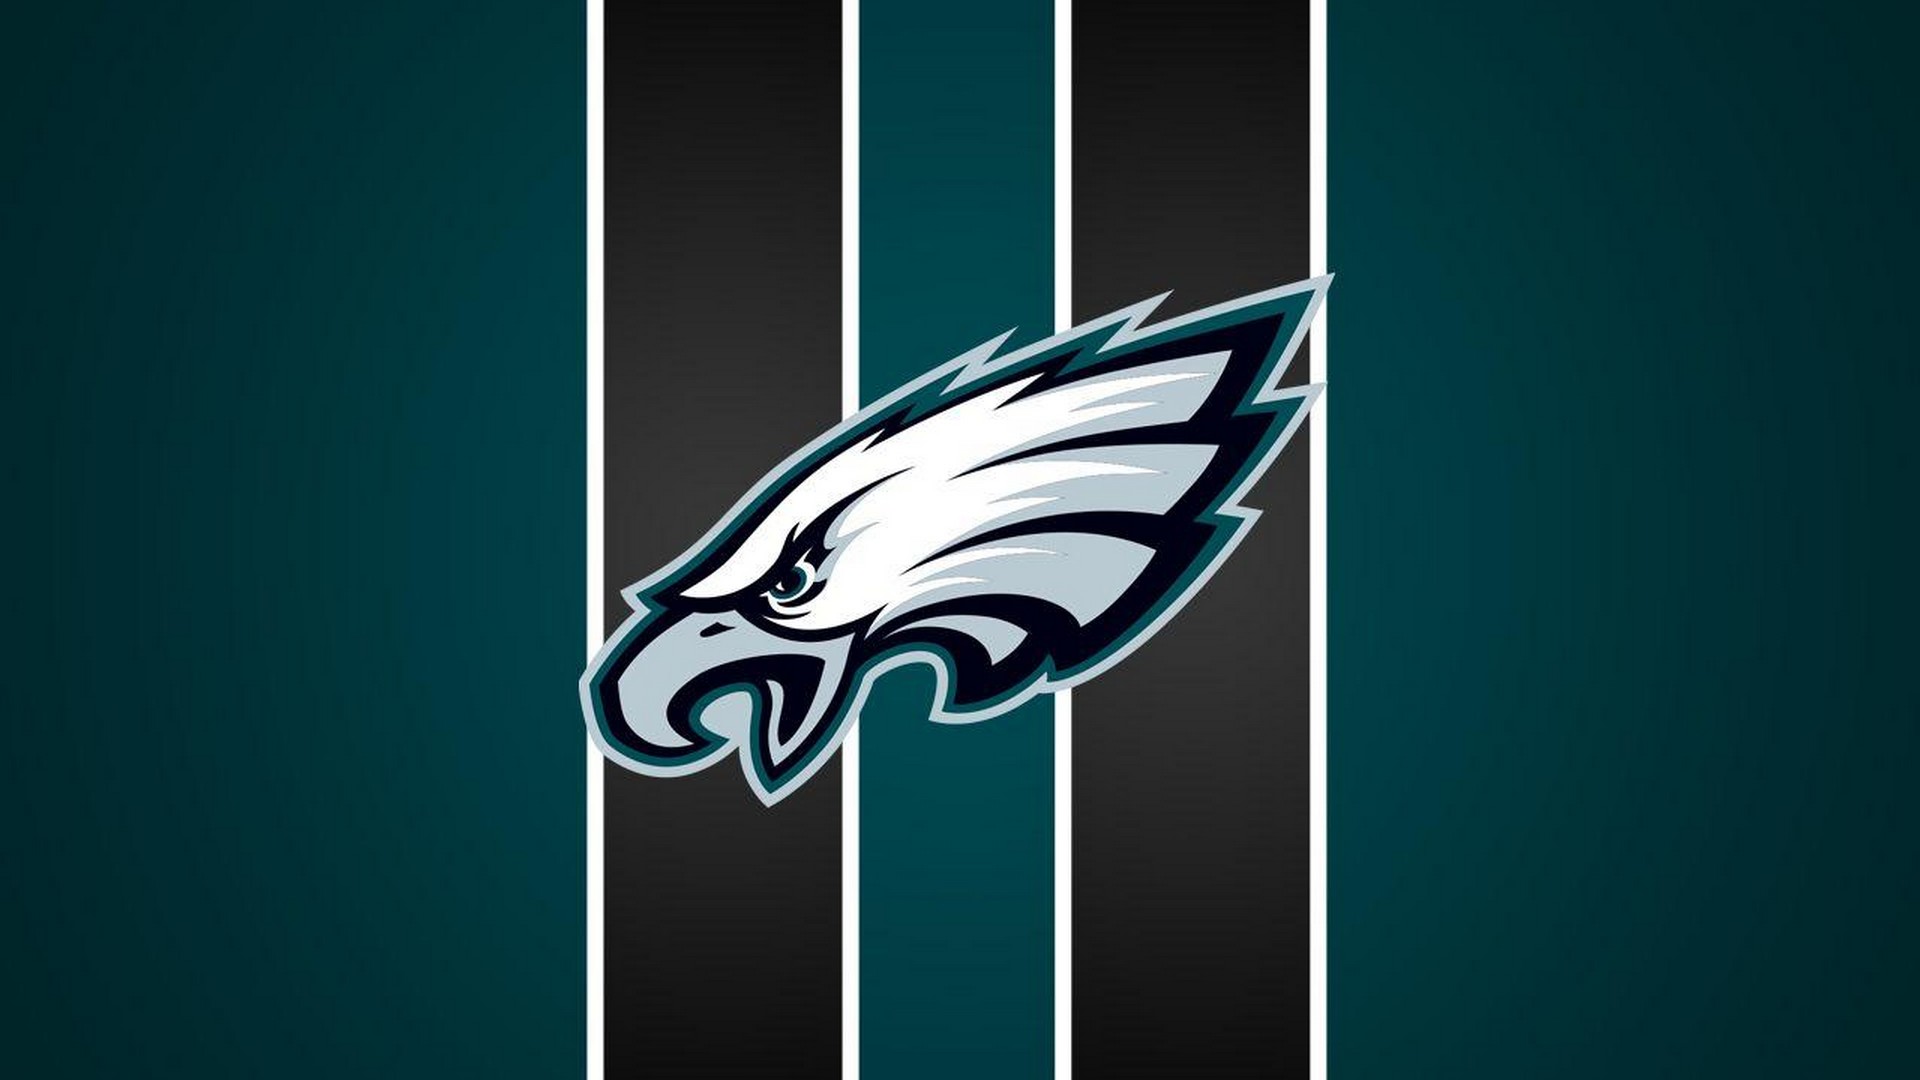 Wallpapers Eagles With Resolution 1920X1080 pixel. You can make this wallpaper for your Mac or Windows Desktop Background, iPhone, Android or Tablet and another Smartphone device for free